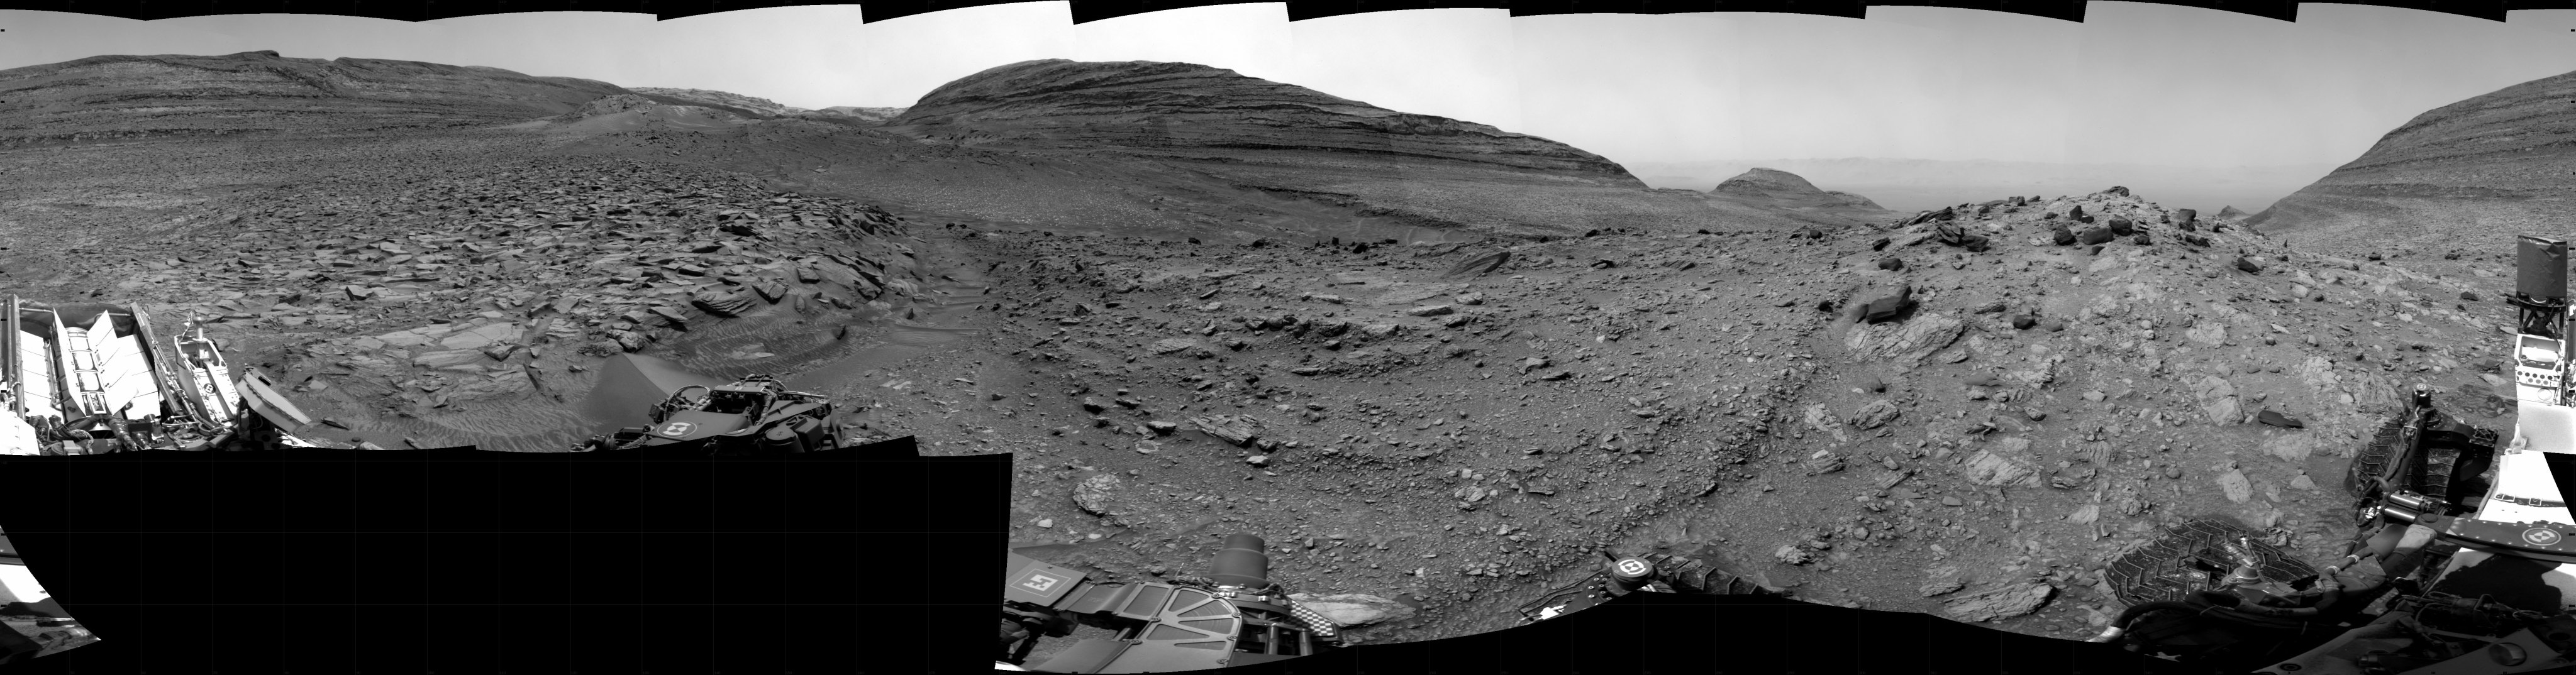 Curiosity took the images on May 13, 2024, Sol 4183 of the Mars Science Laboratory mission at drive 1140, site number 107. The local mean solar time for the image exposures was from 1 PM to 12 PM.